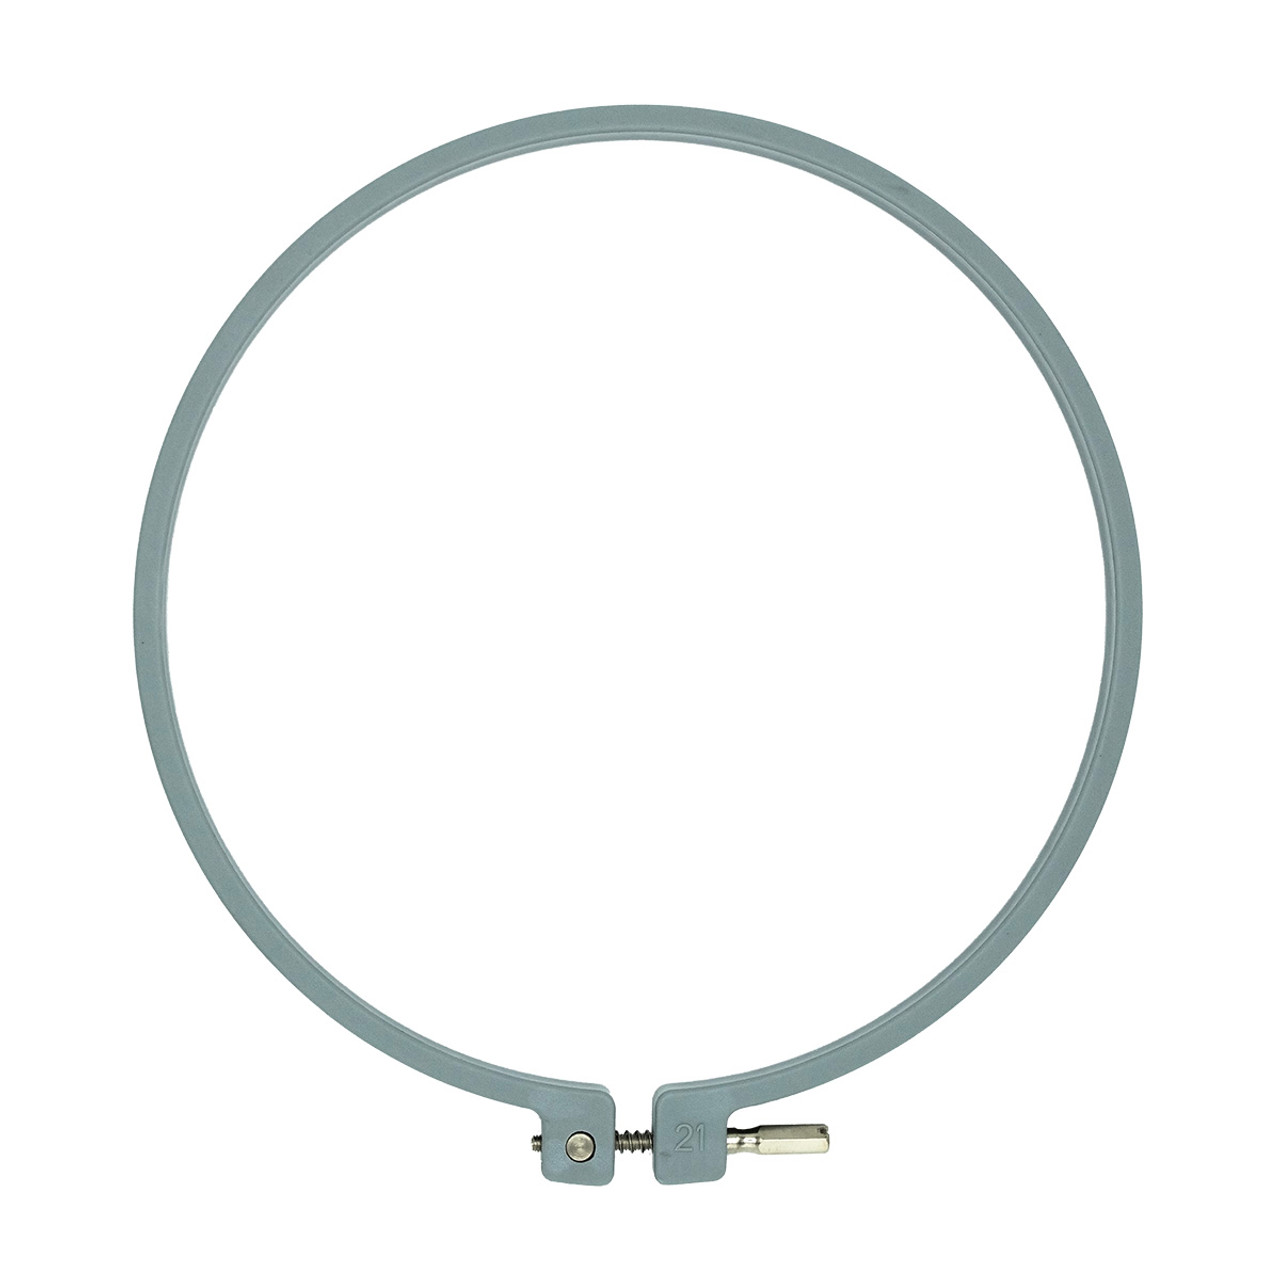 HOOP, OUTER RING, 21cm (8.26 inches)